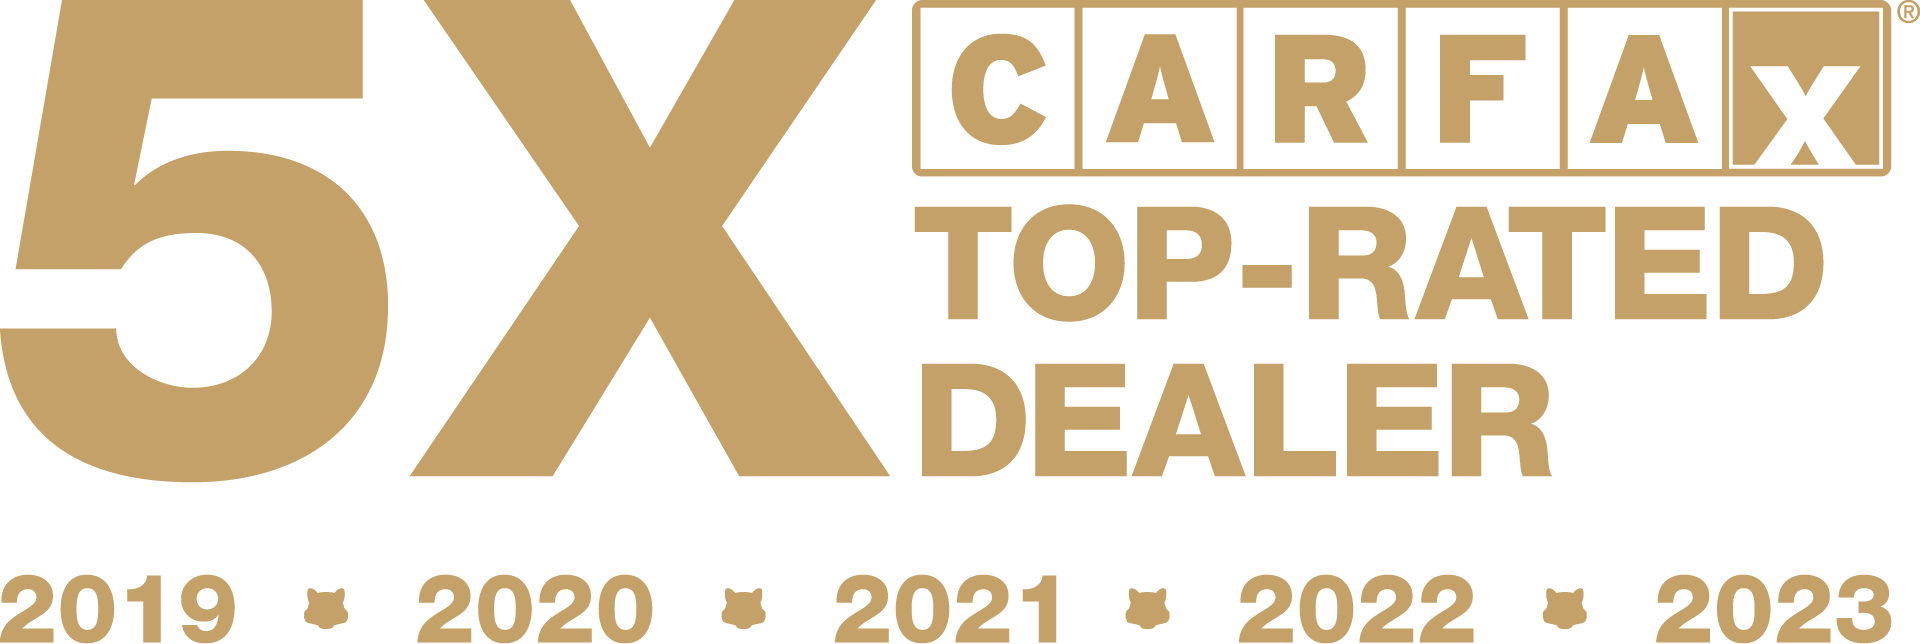 5X CarFax Top-Rated Dealer 2019, 2020, 2021, 2022, and 2023